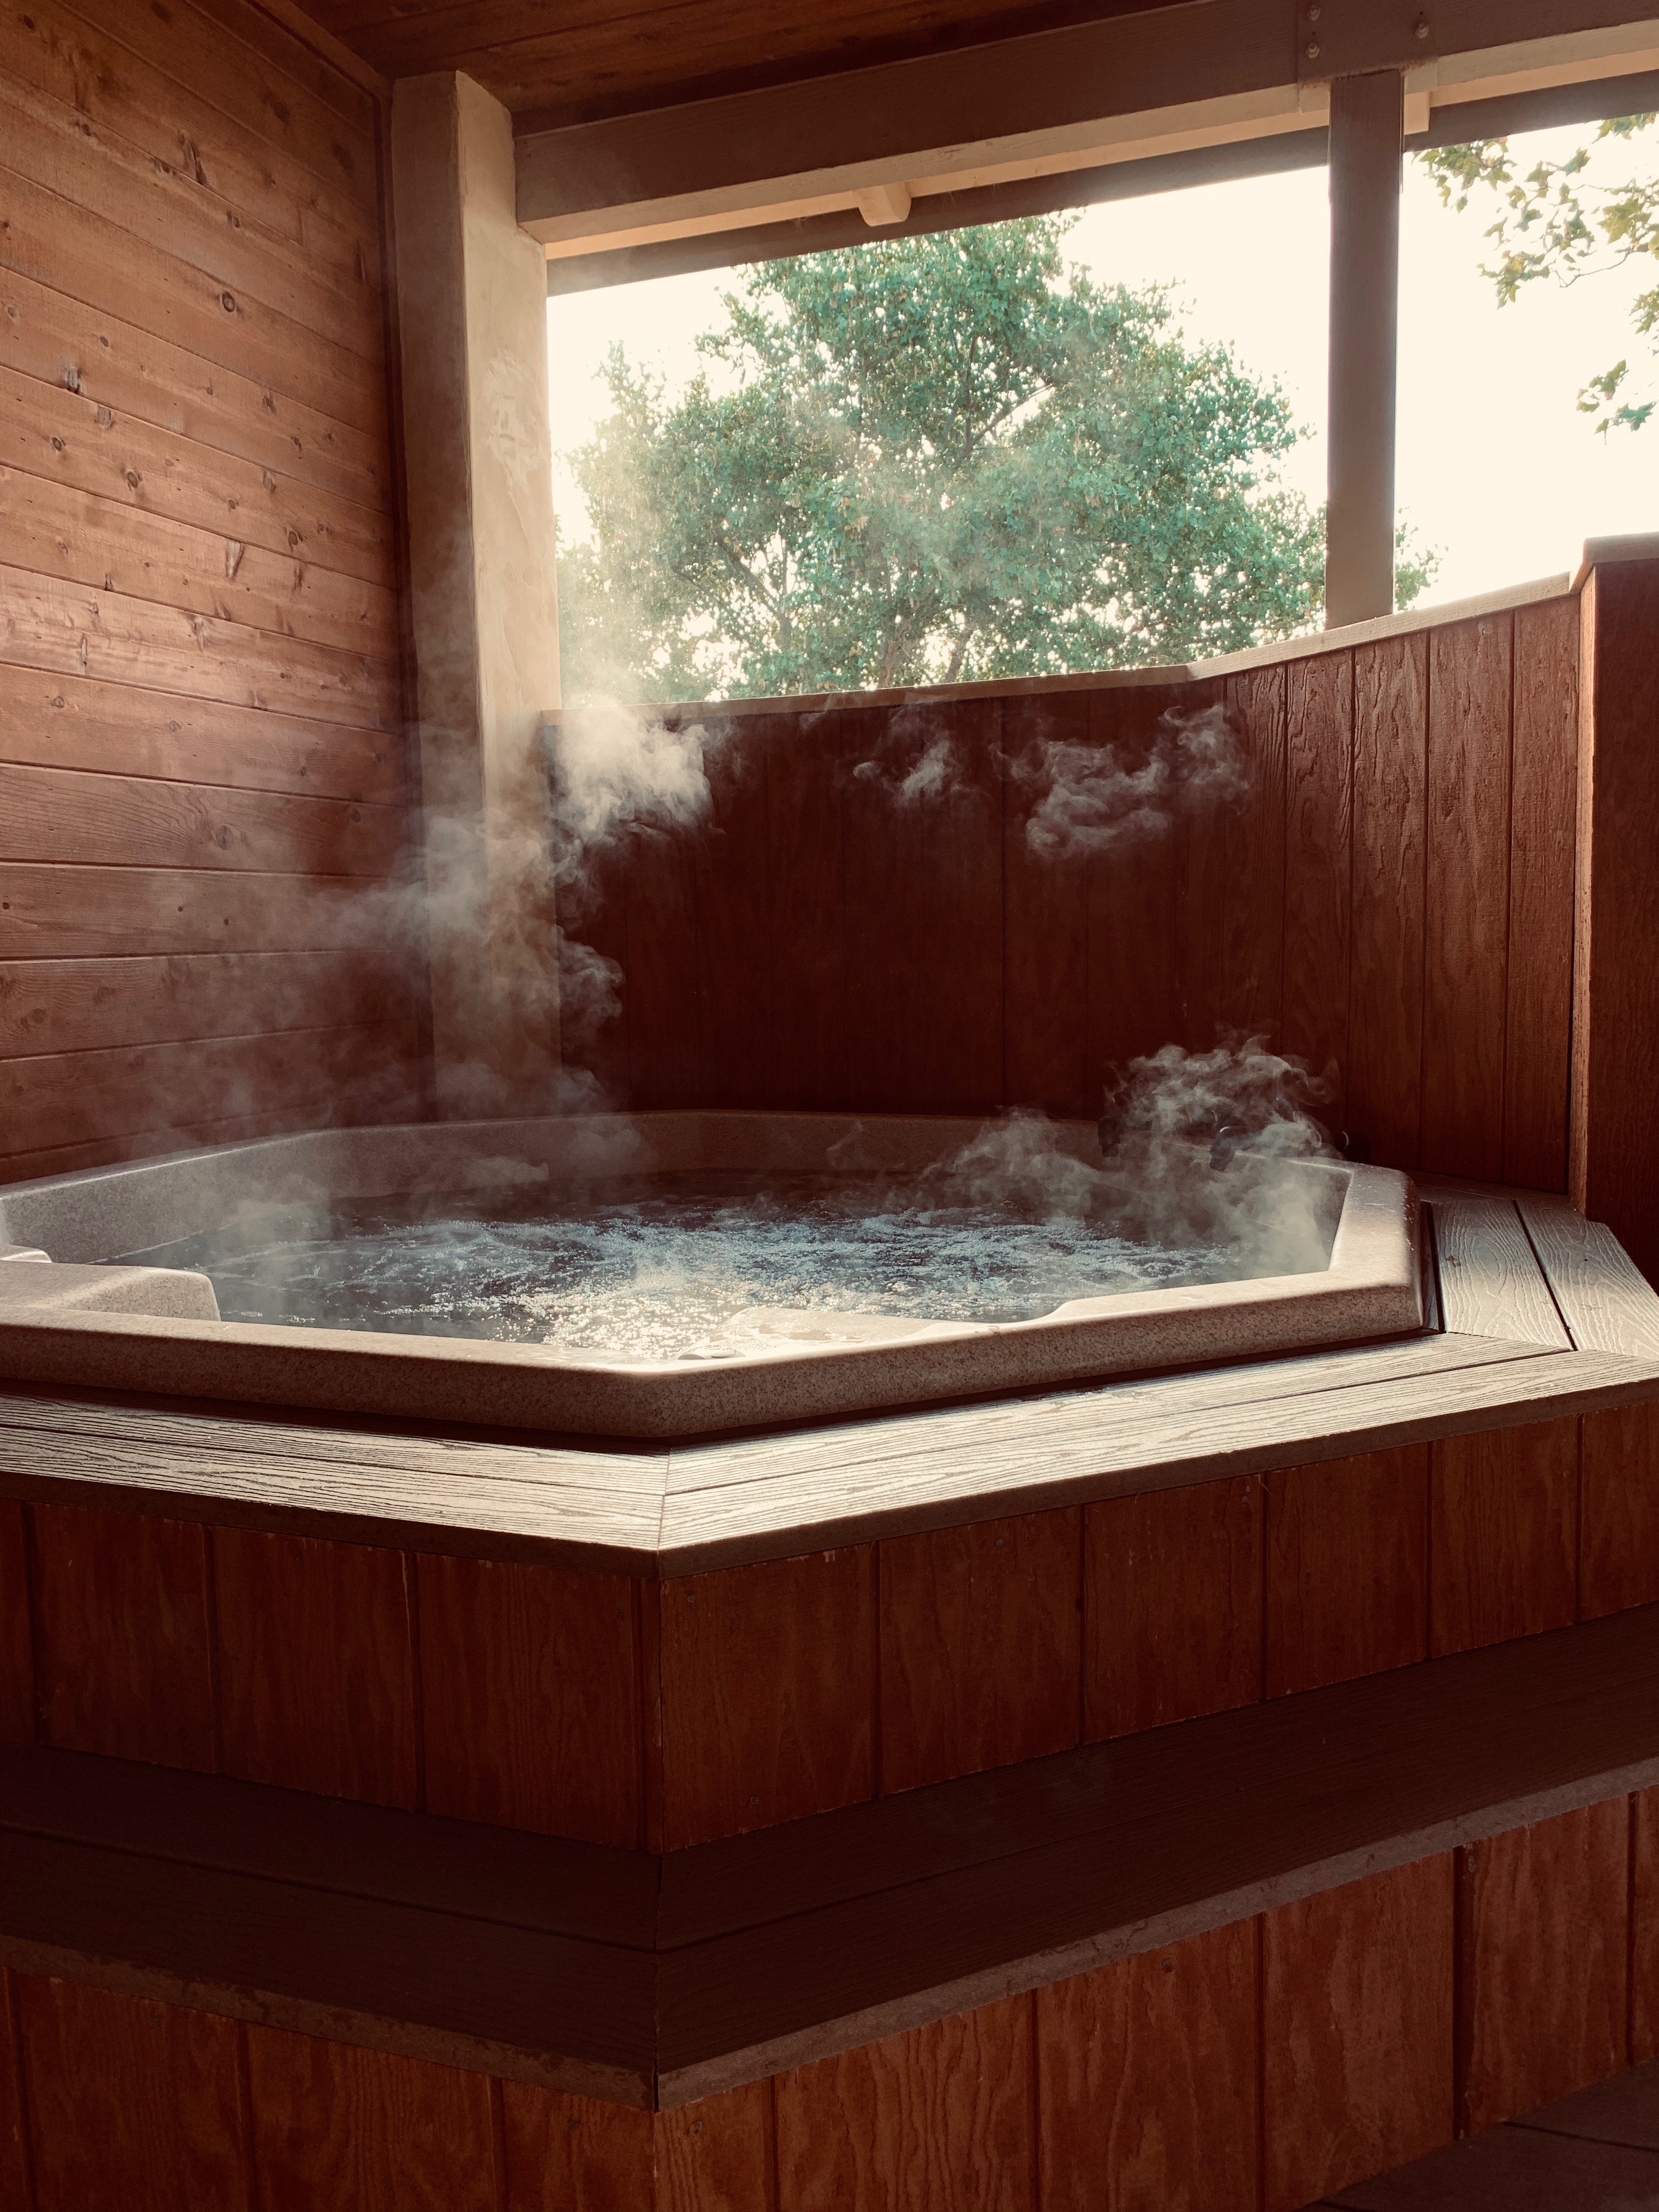 Can You Use a Hot Tub in Summer? - Hot Spring Spas